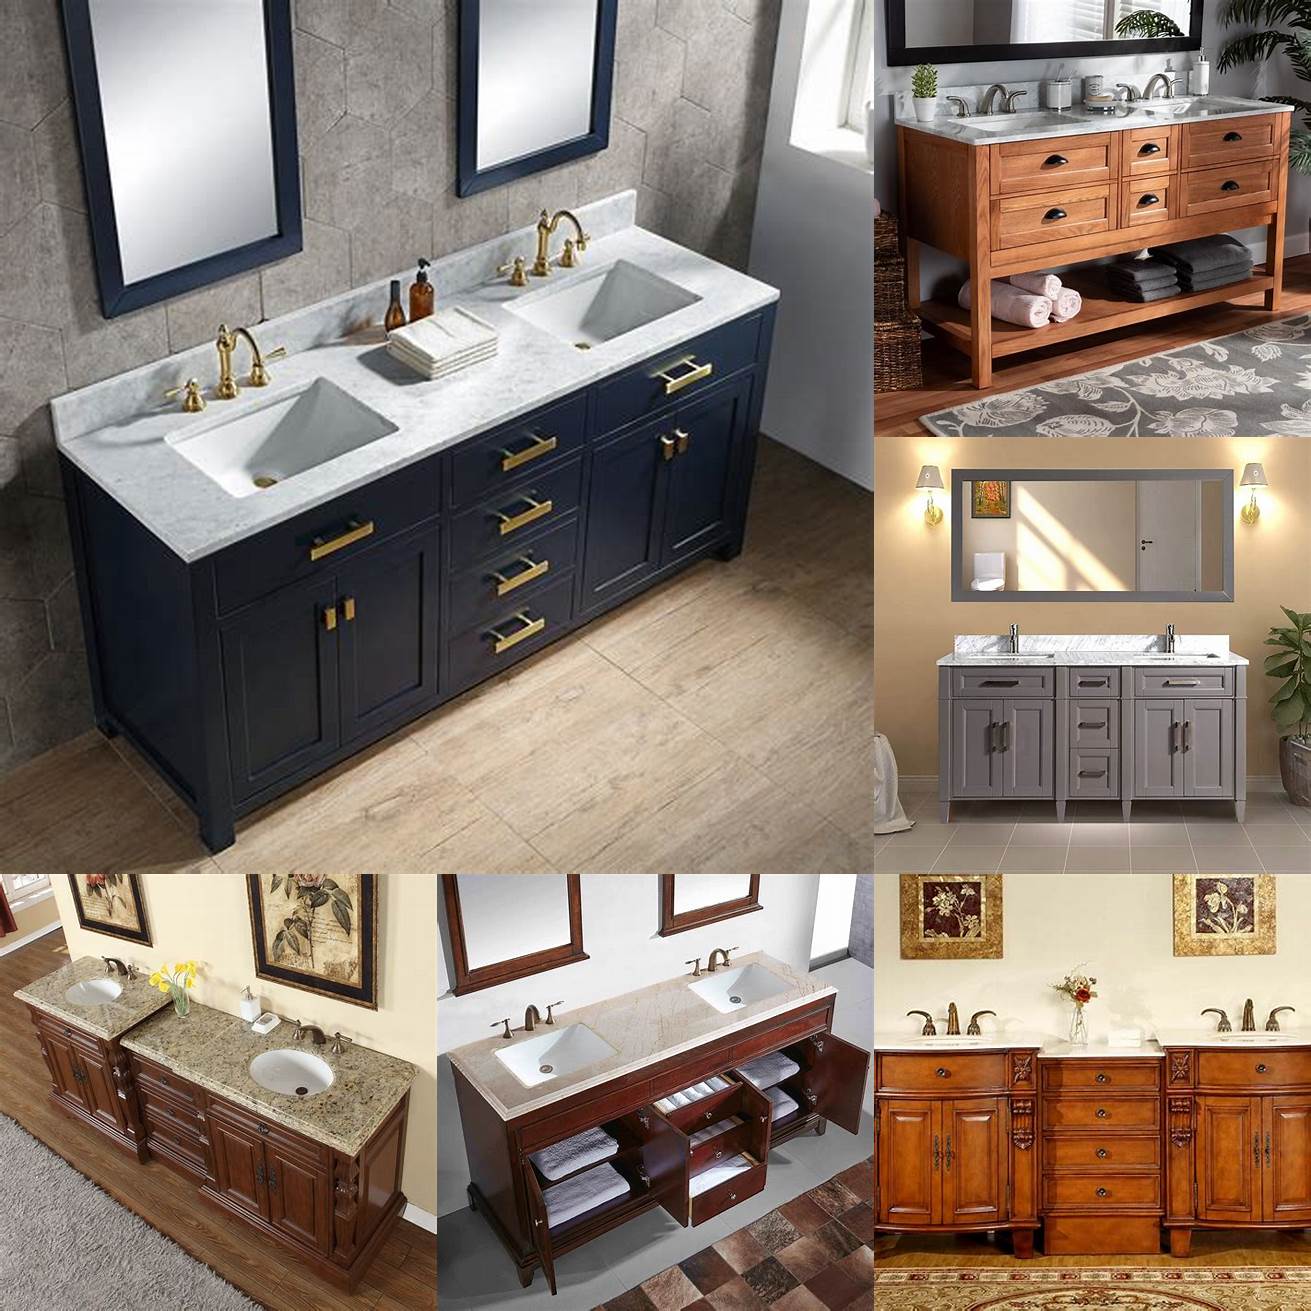 Image A double sink vanity with wooden cabinets and marble countertop